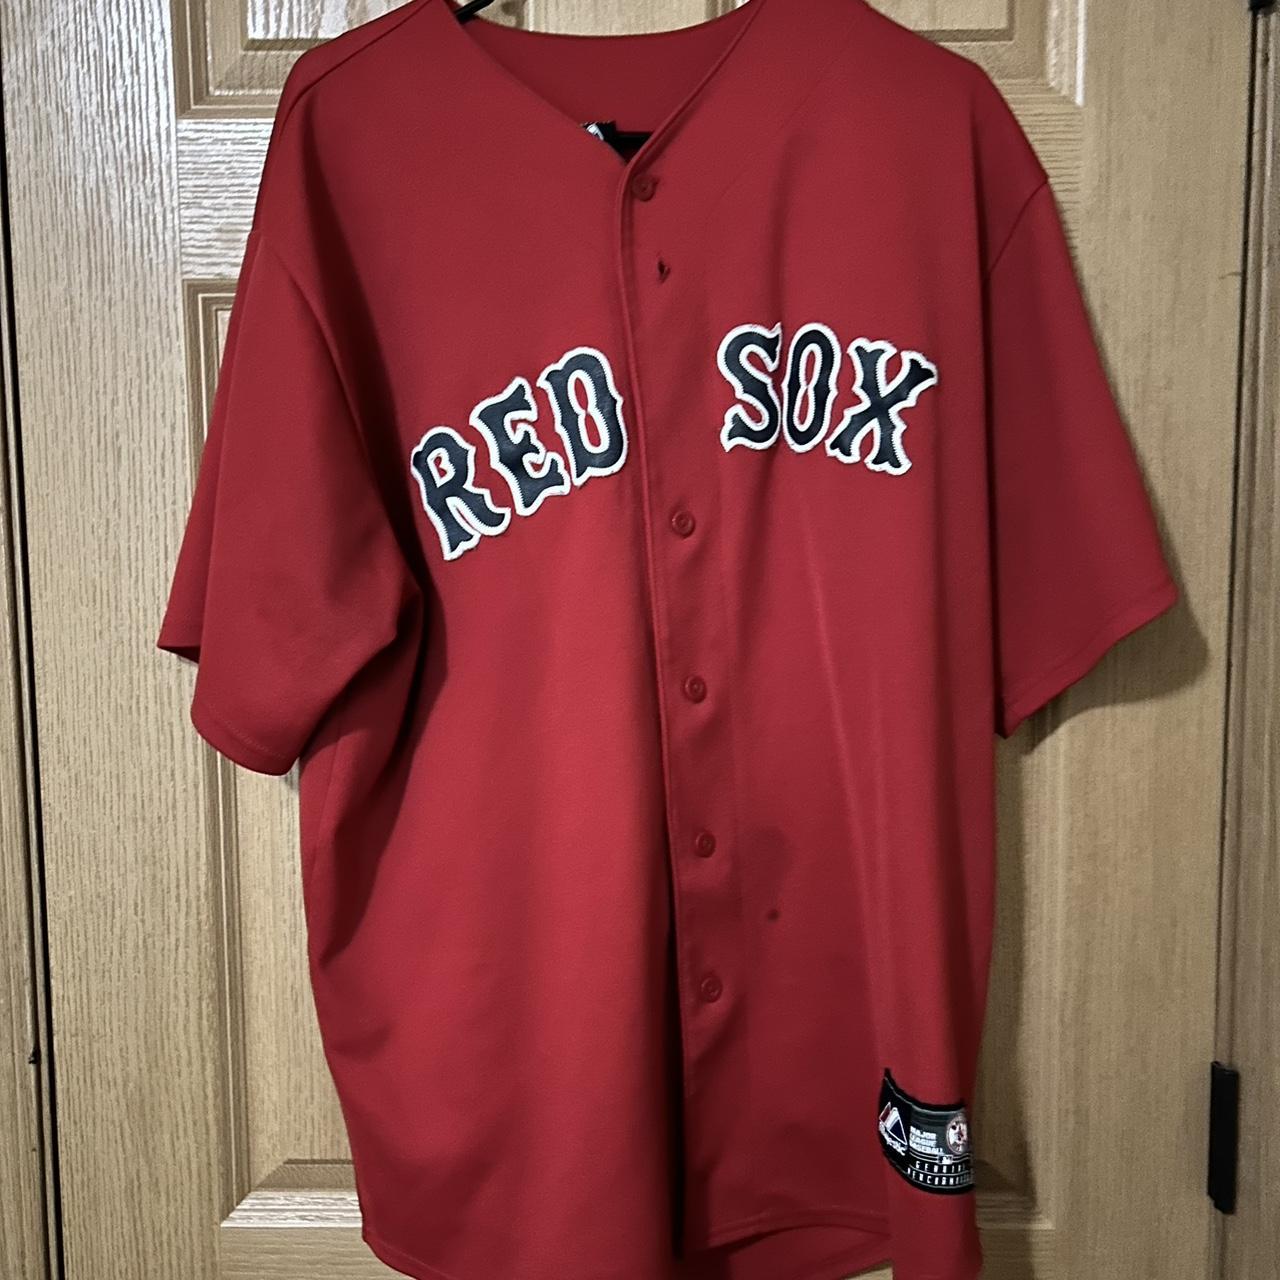 Boston Red Sox Jersey- Great condition! Size Medium